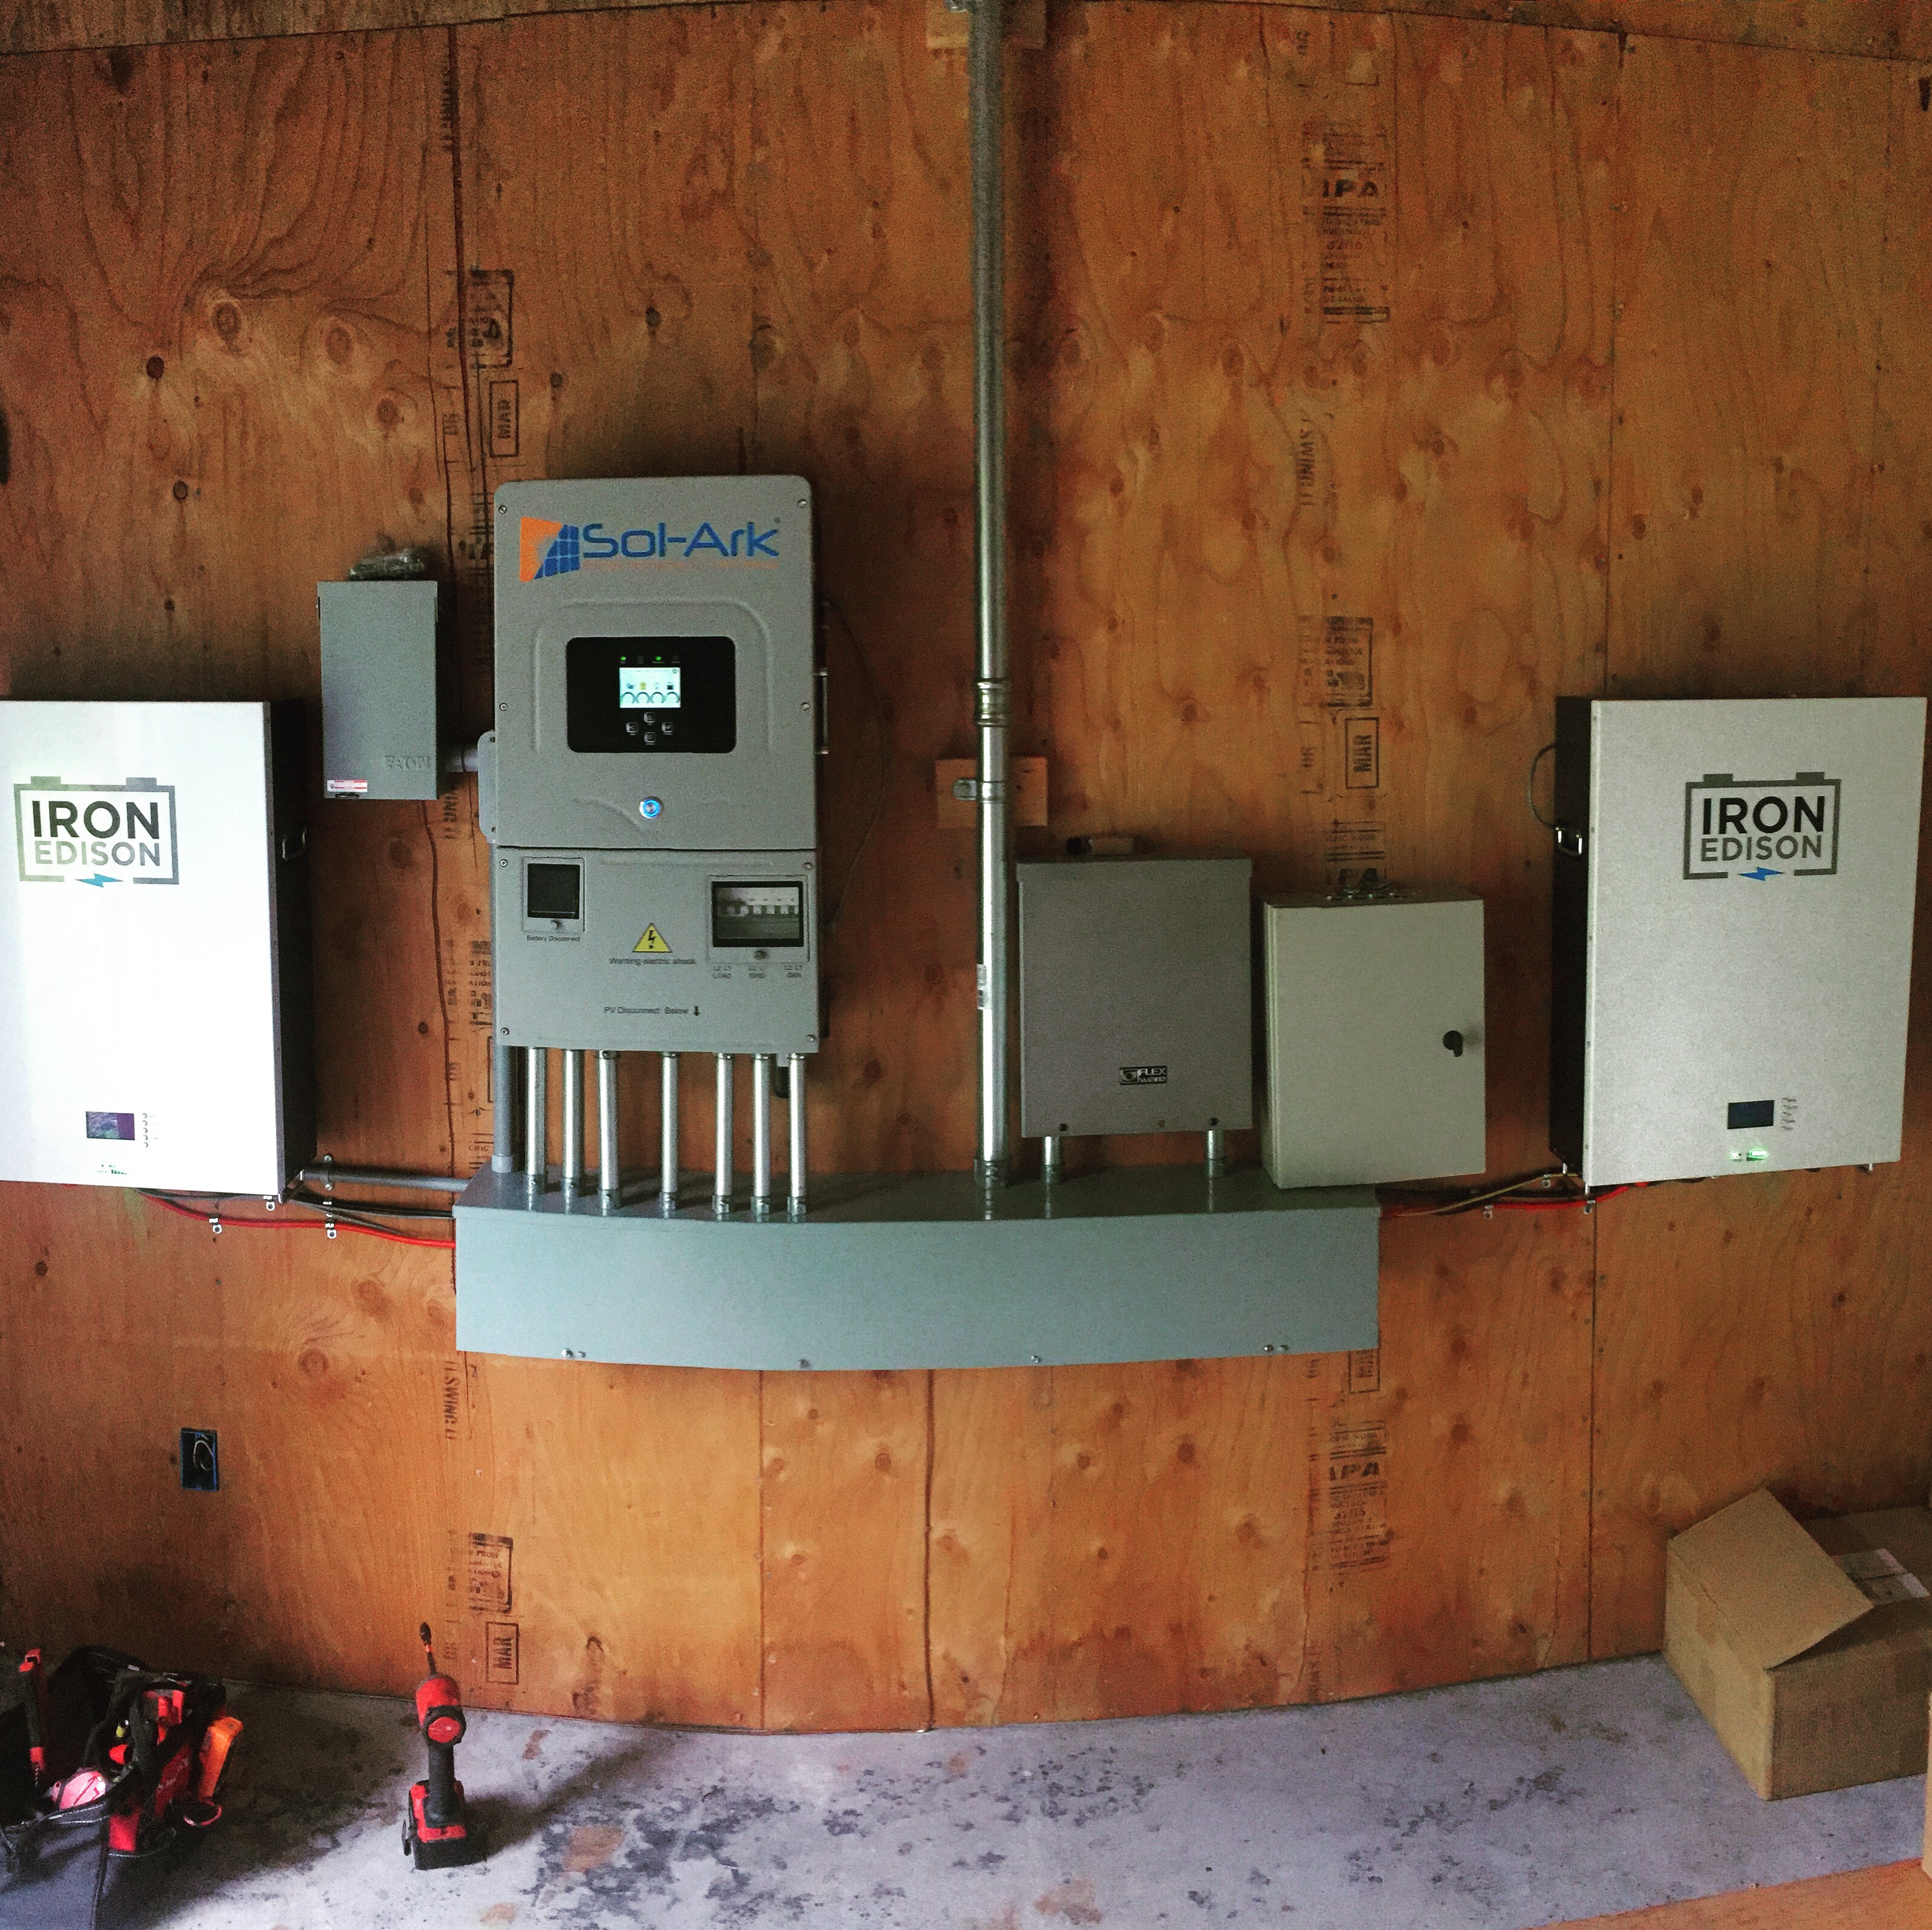 Customer Installation of the Iron Edison RE-Volt Lithium Battery with the Sol-Ark Inverter